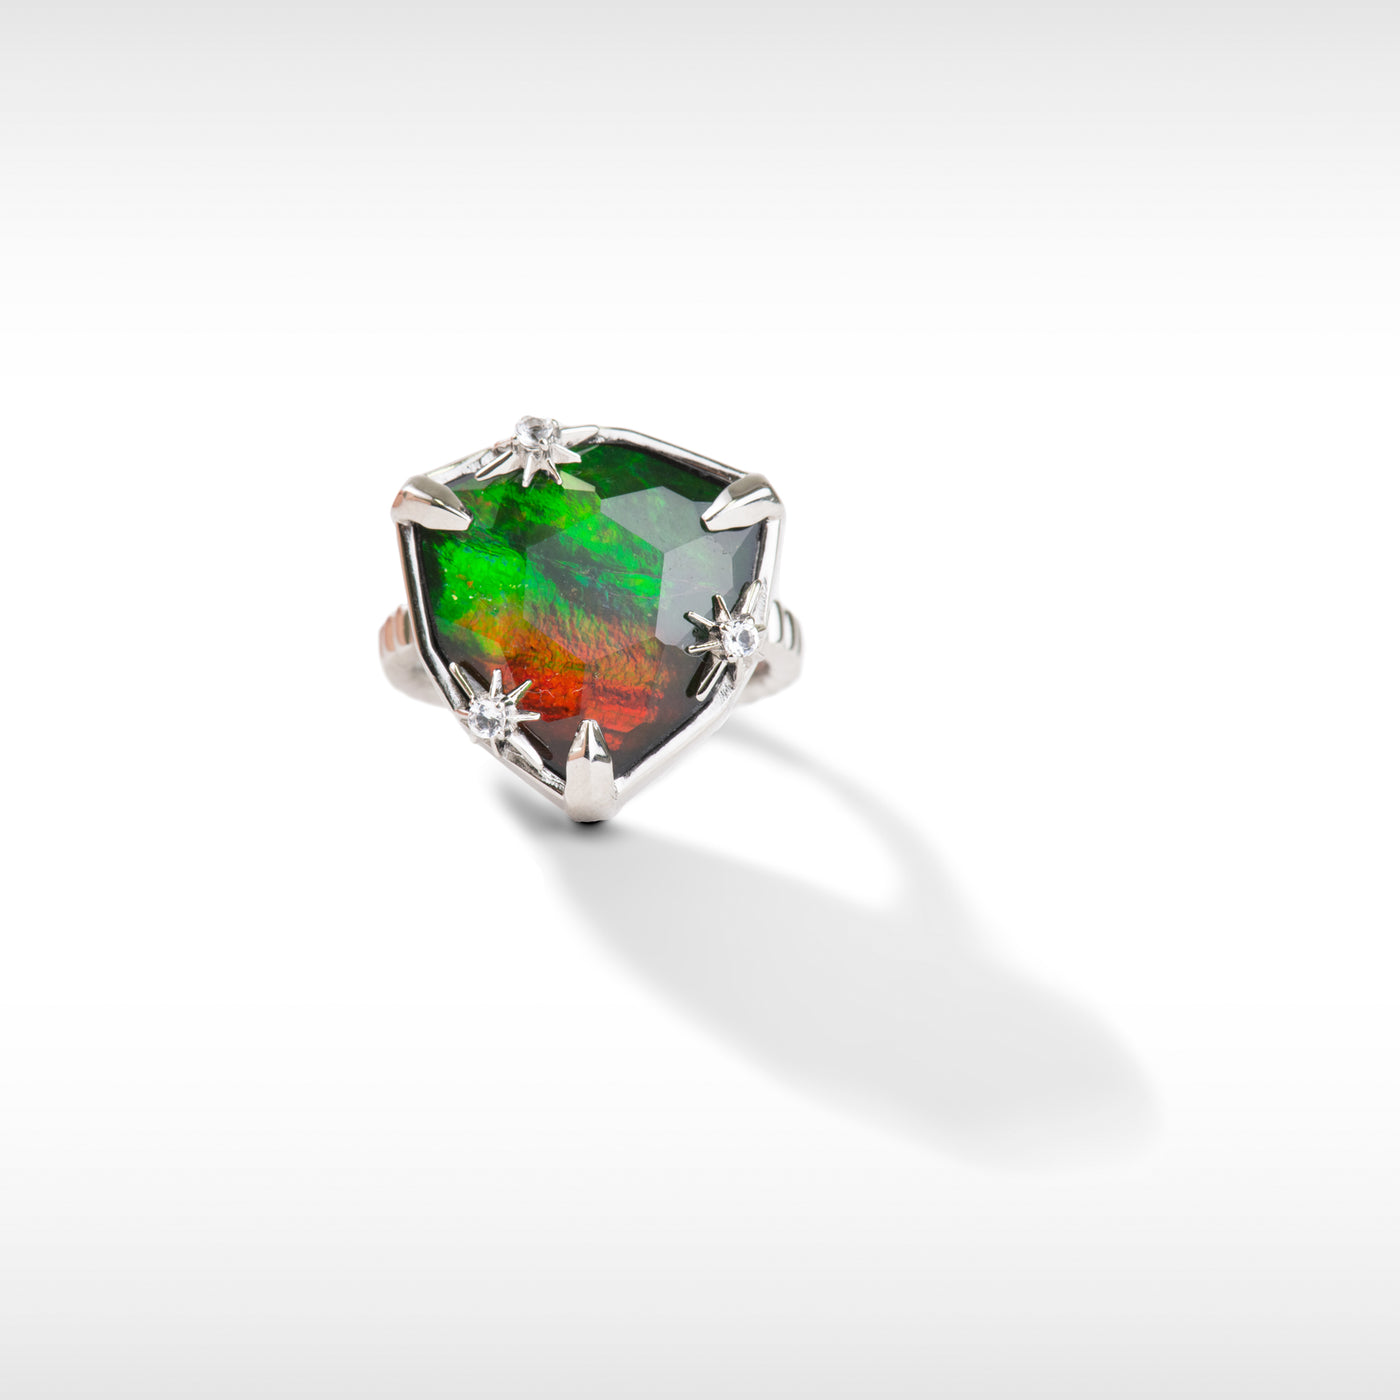 Starlight Trillion Ammolite Ring with White Topaz in Sterling Silver